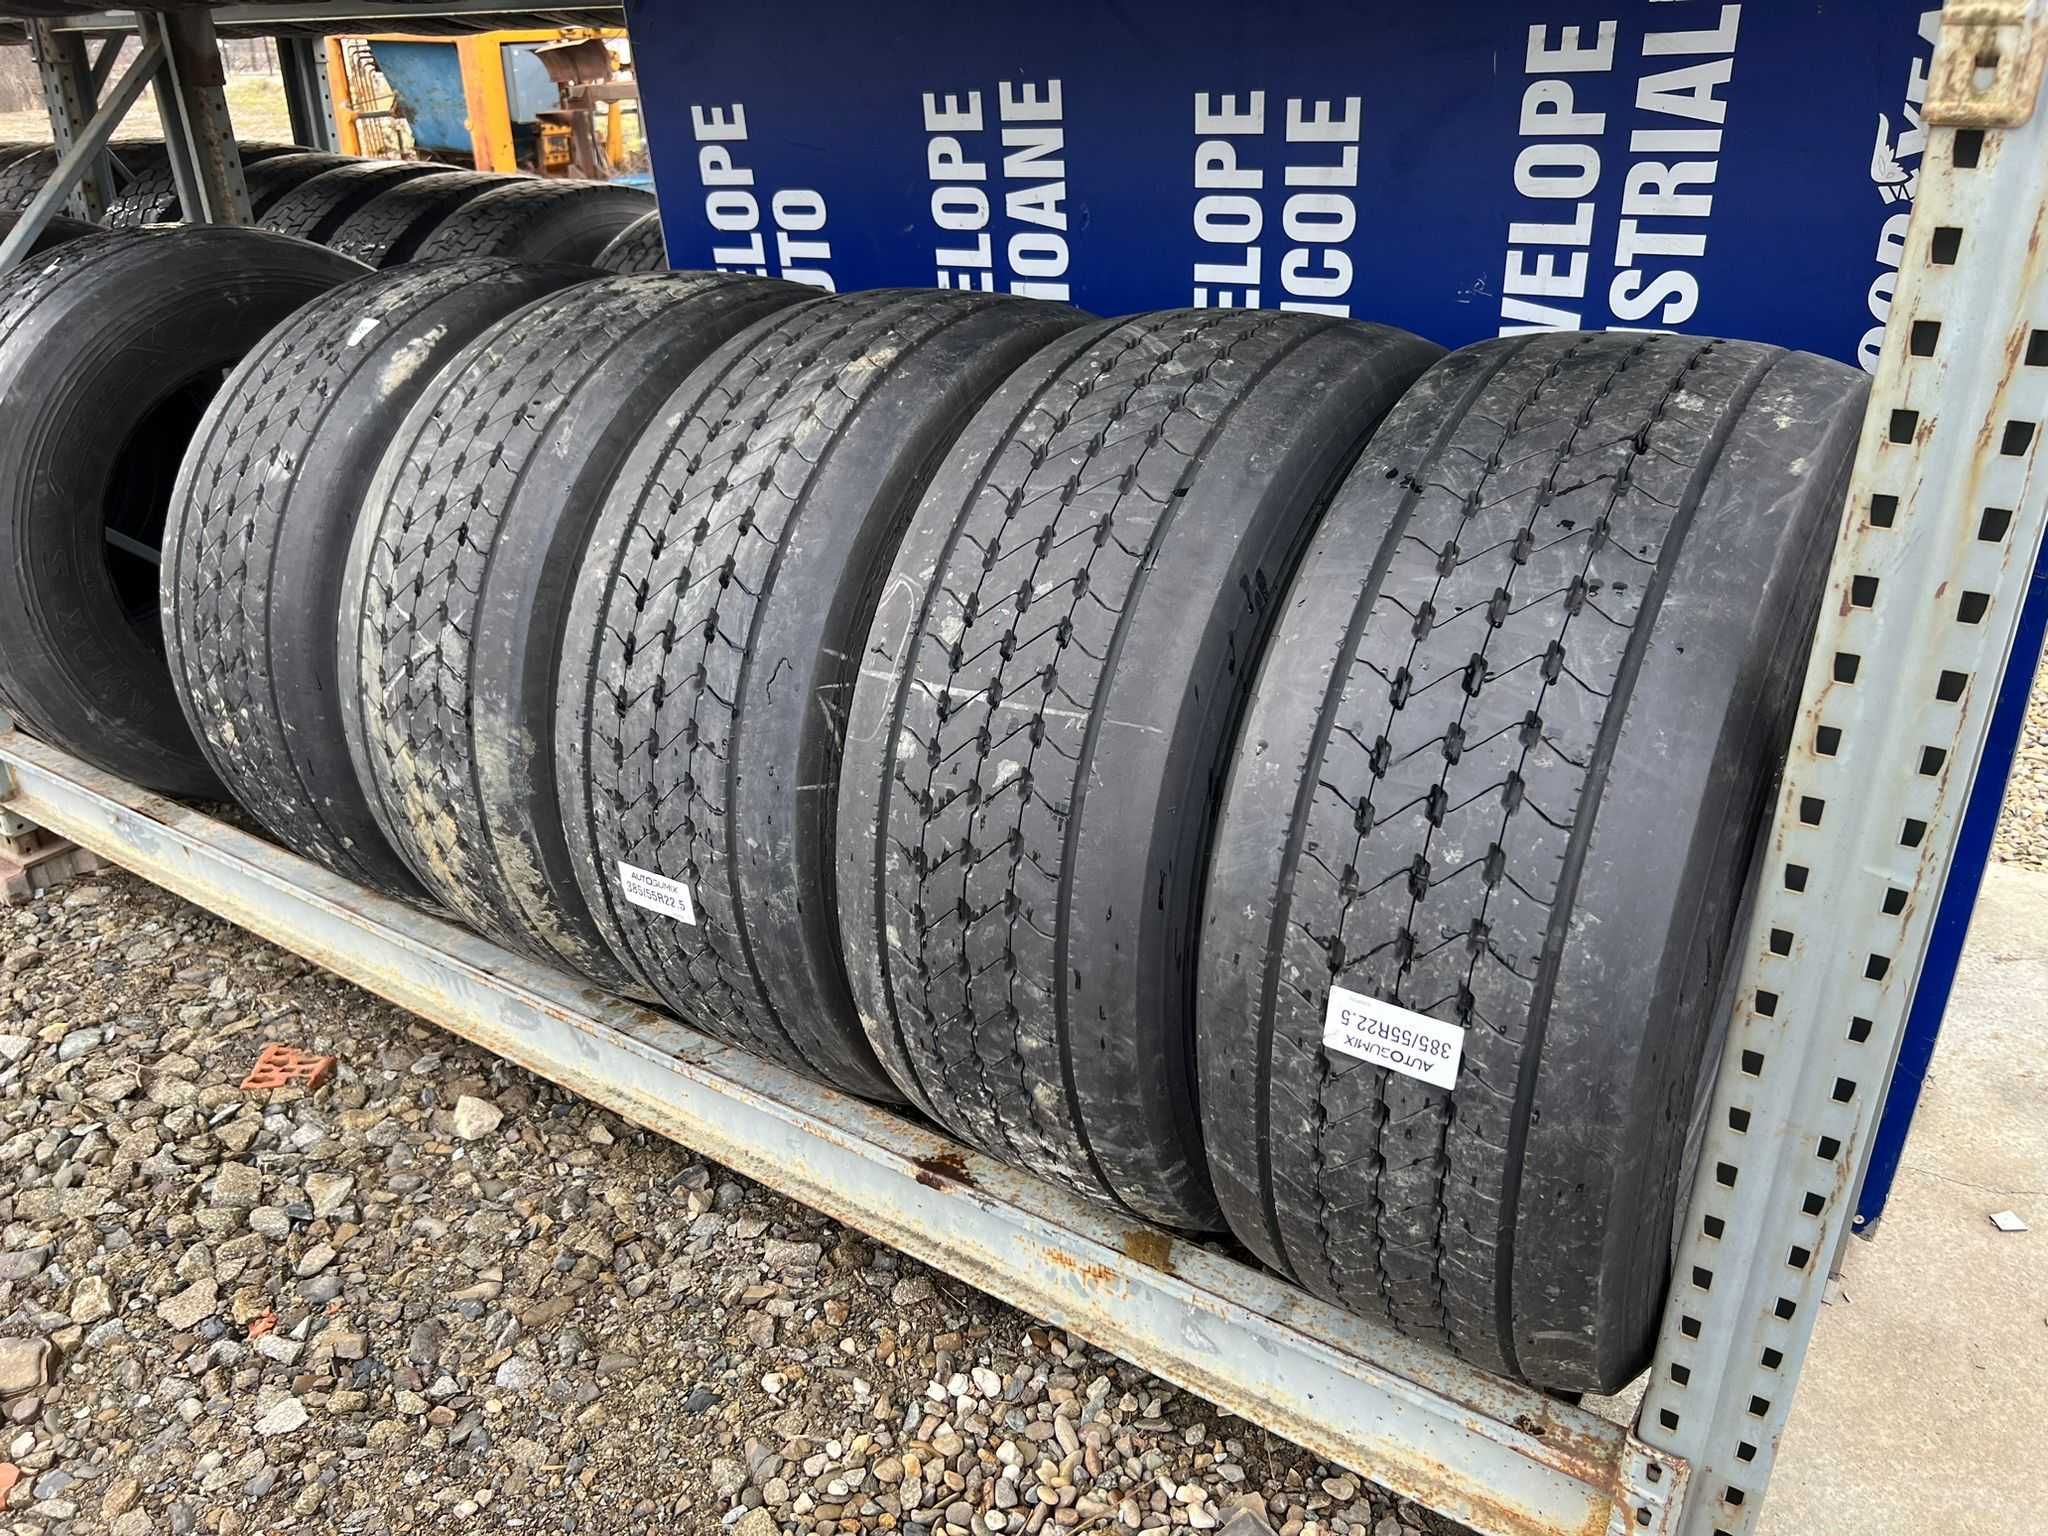 385/55r22.5 anvelope camion